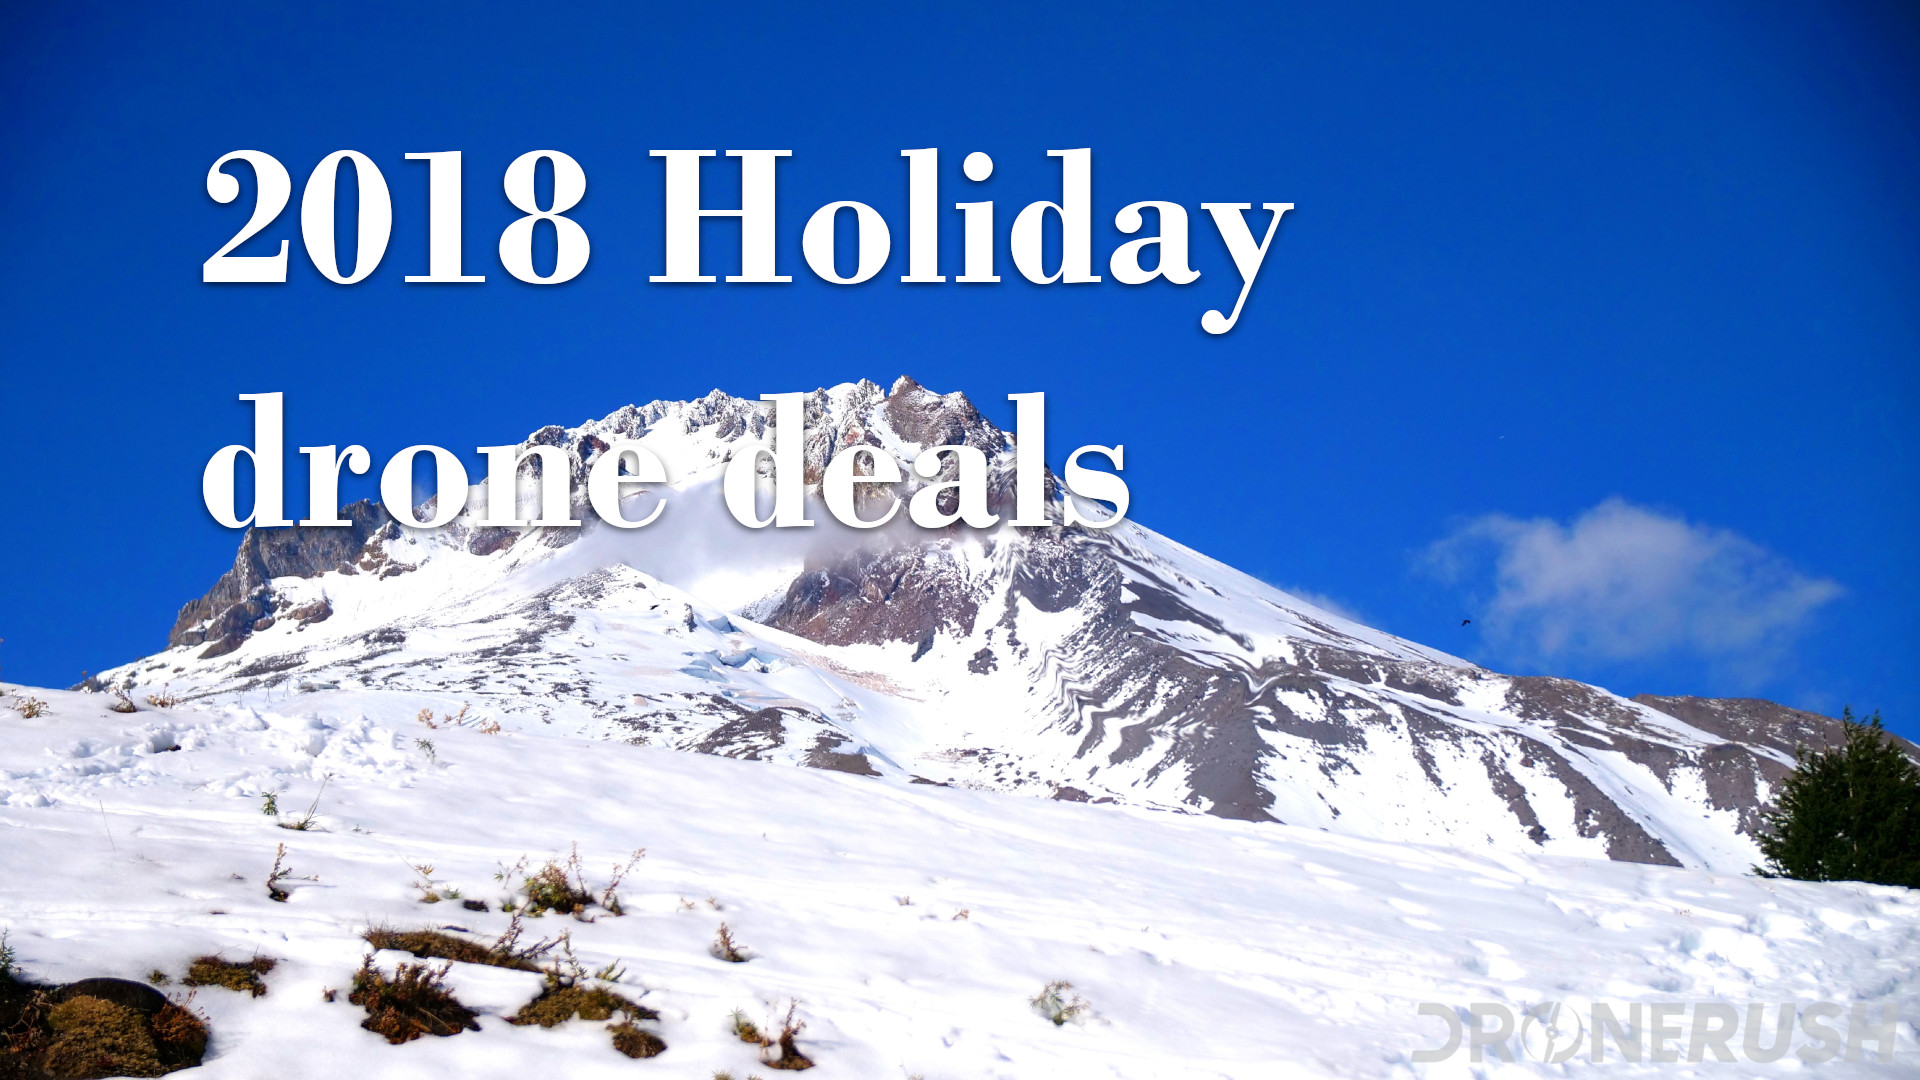 Drone Rush holiday drone deals 2018